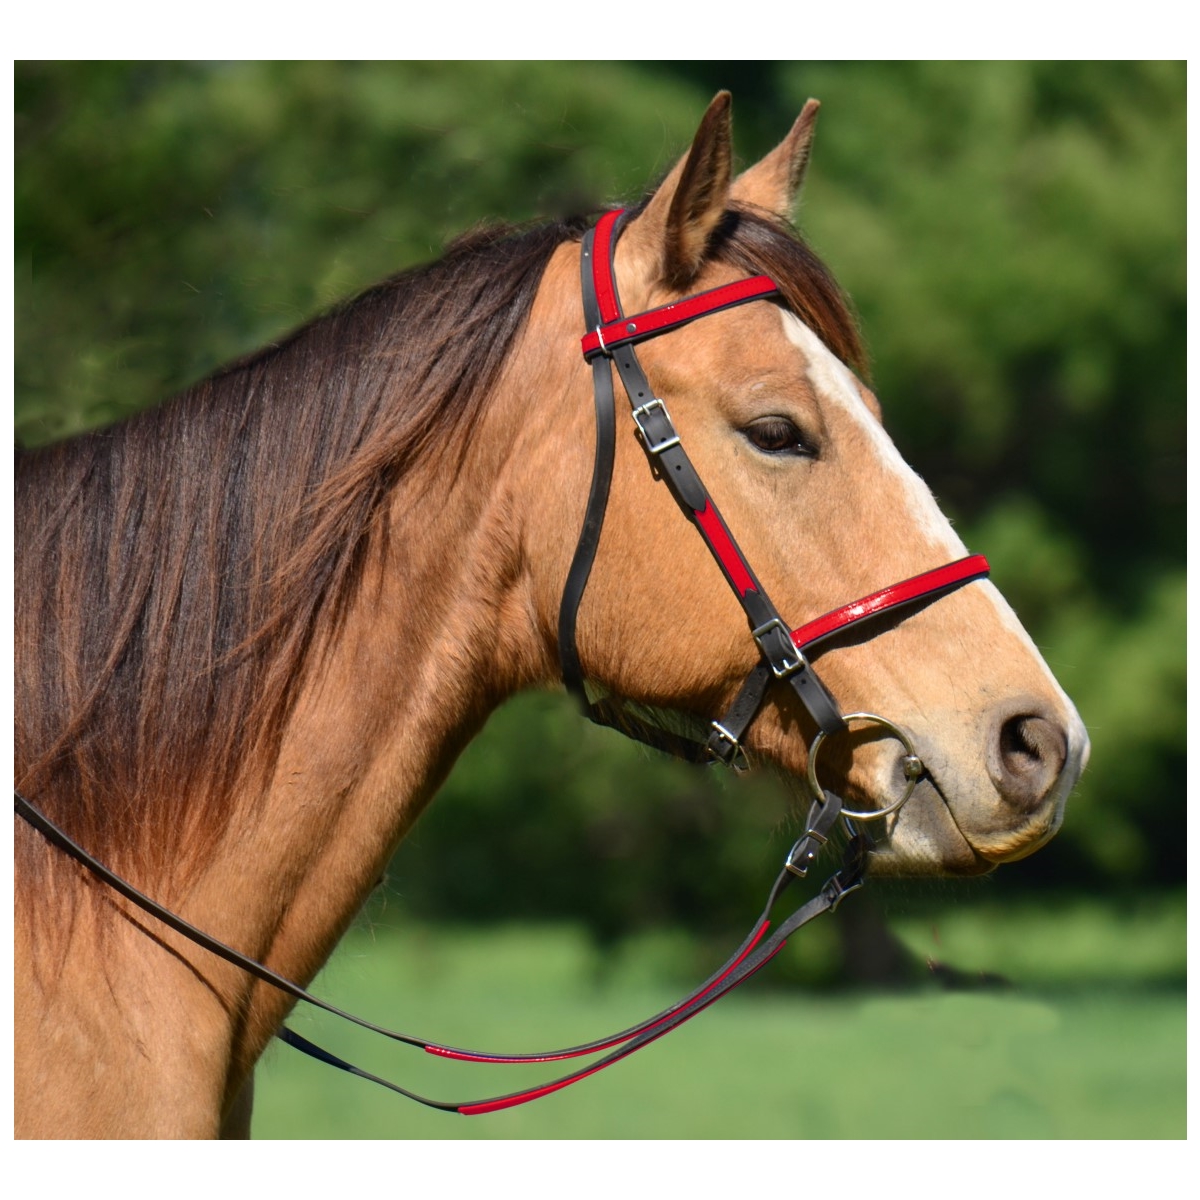 BETA BIOTHANE with OVERLAY Picnic or Simple Halter Bridle